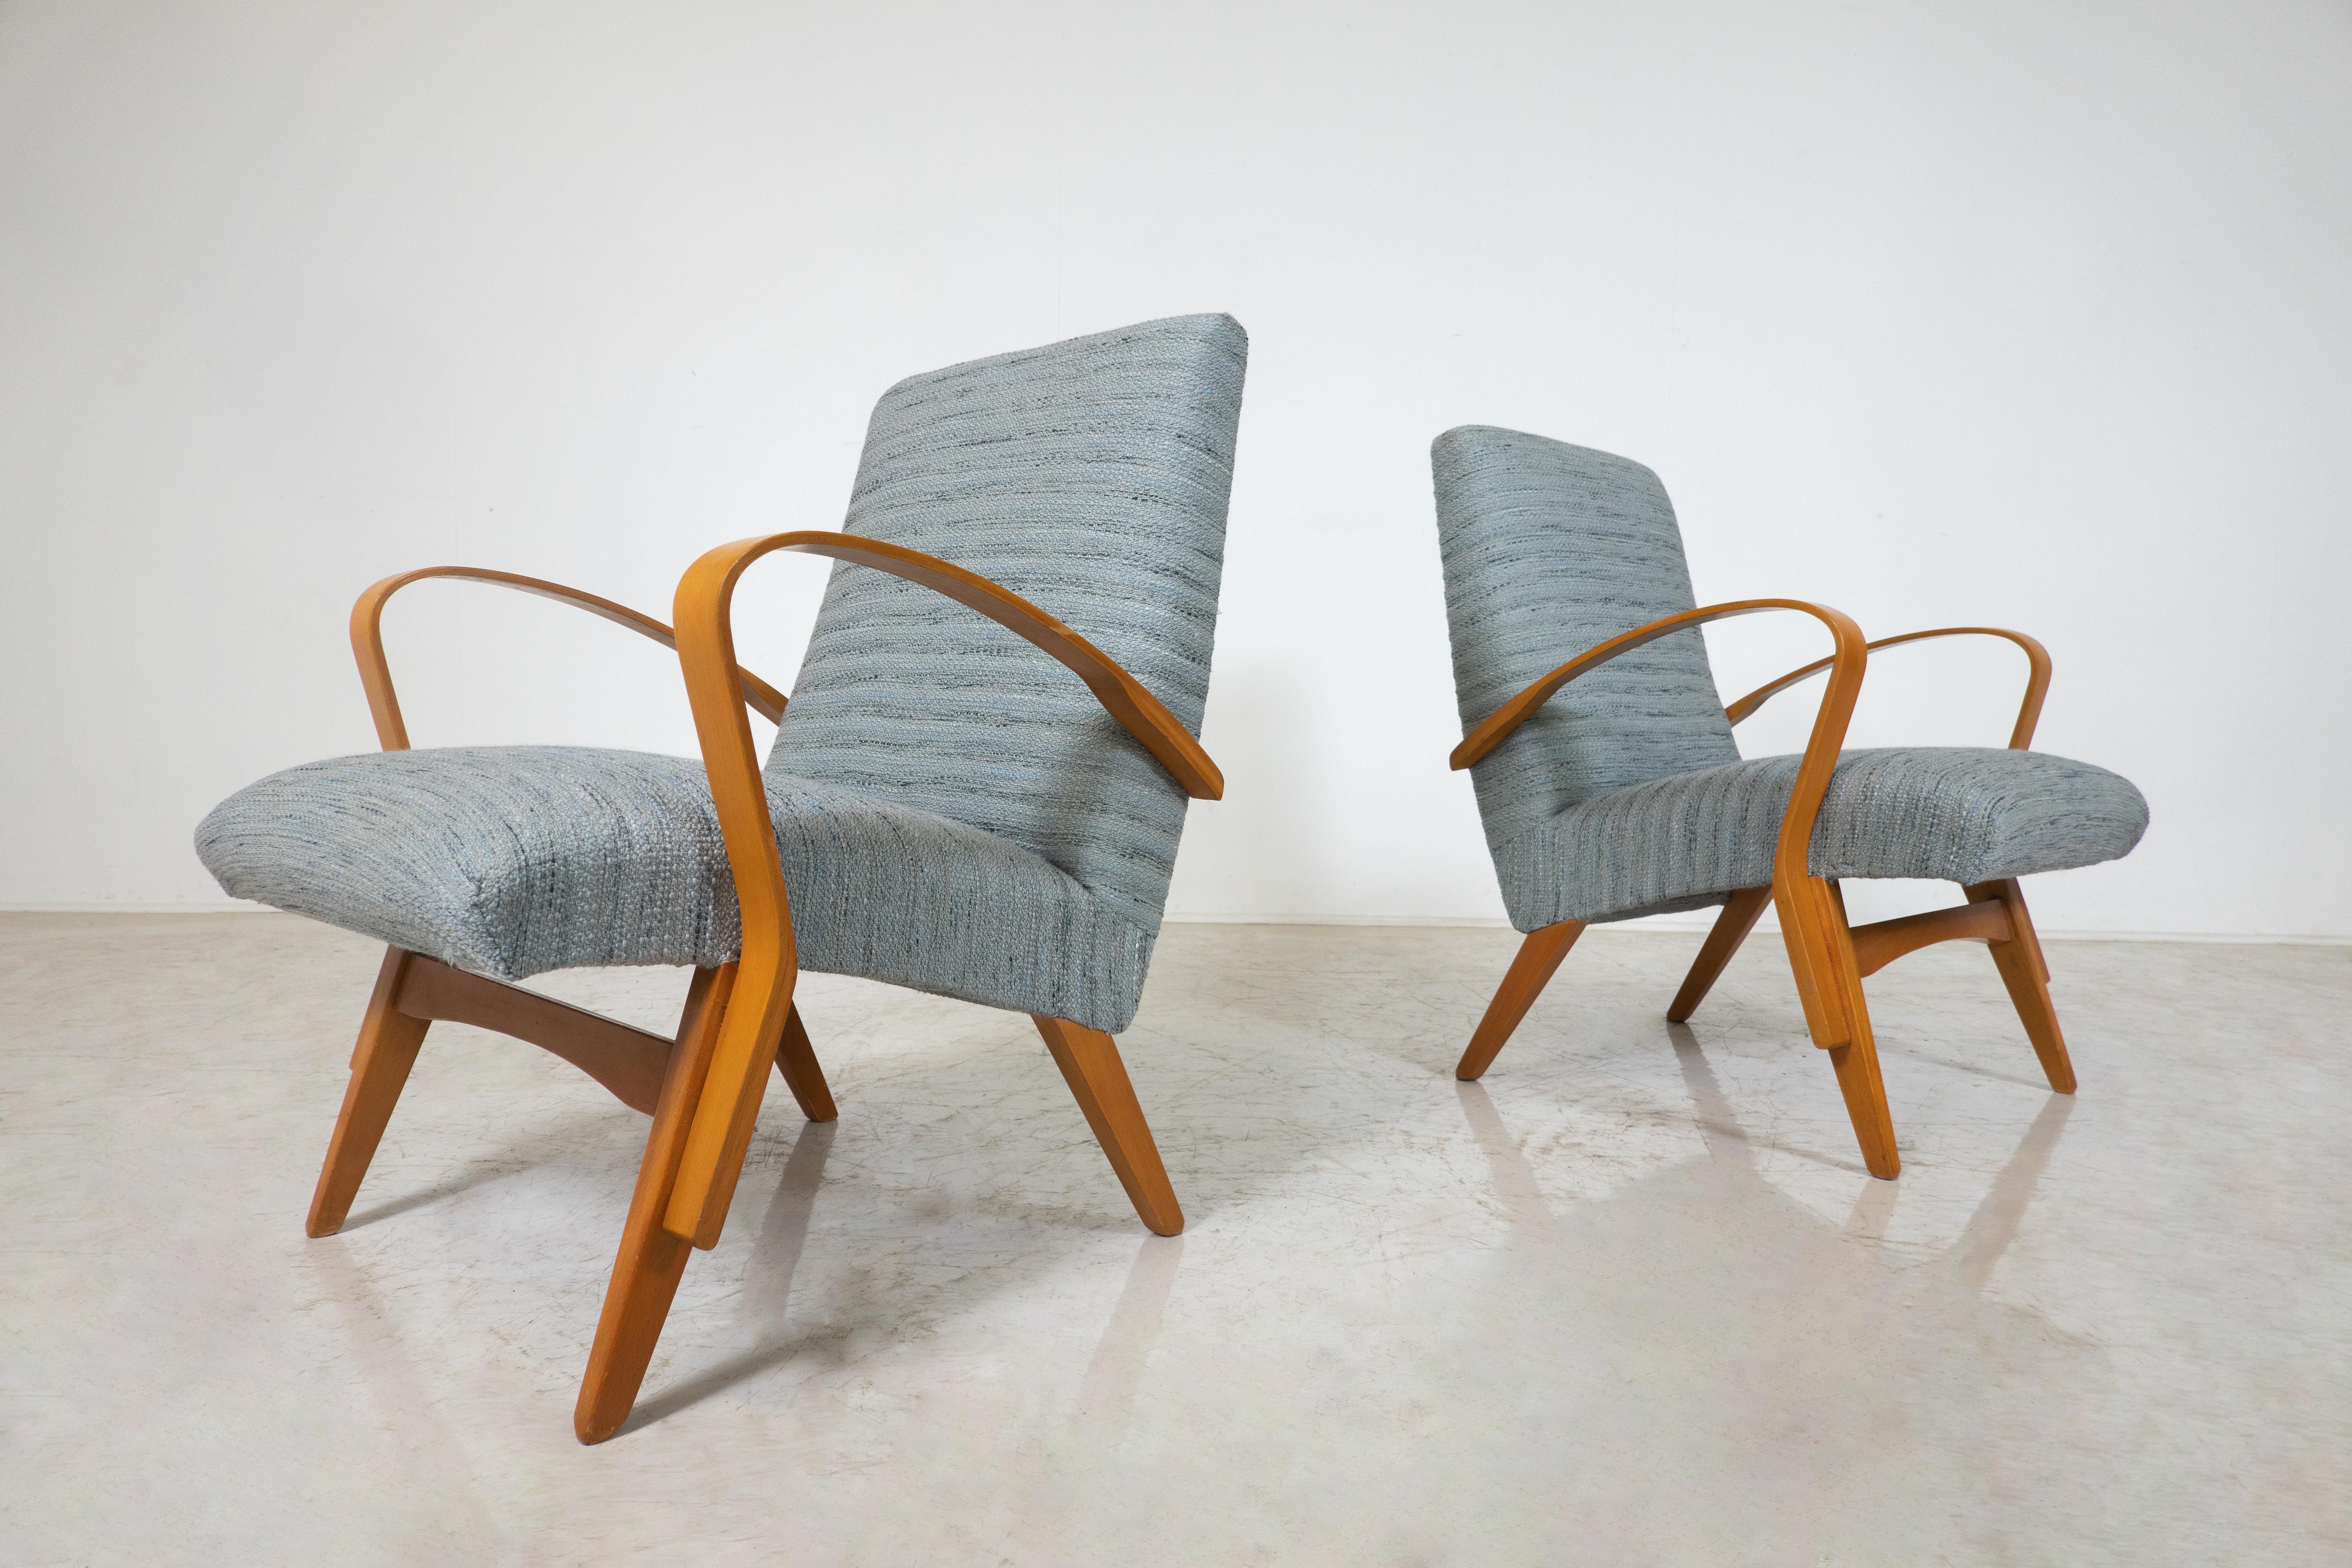 Mid-20th Century Mid-Century Modern Pair of Armchairs, 1950s, Czech Republic (New Uphostery) For Sale